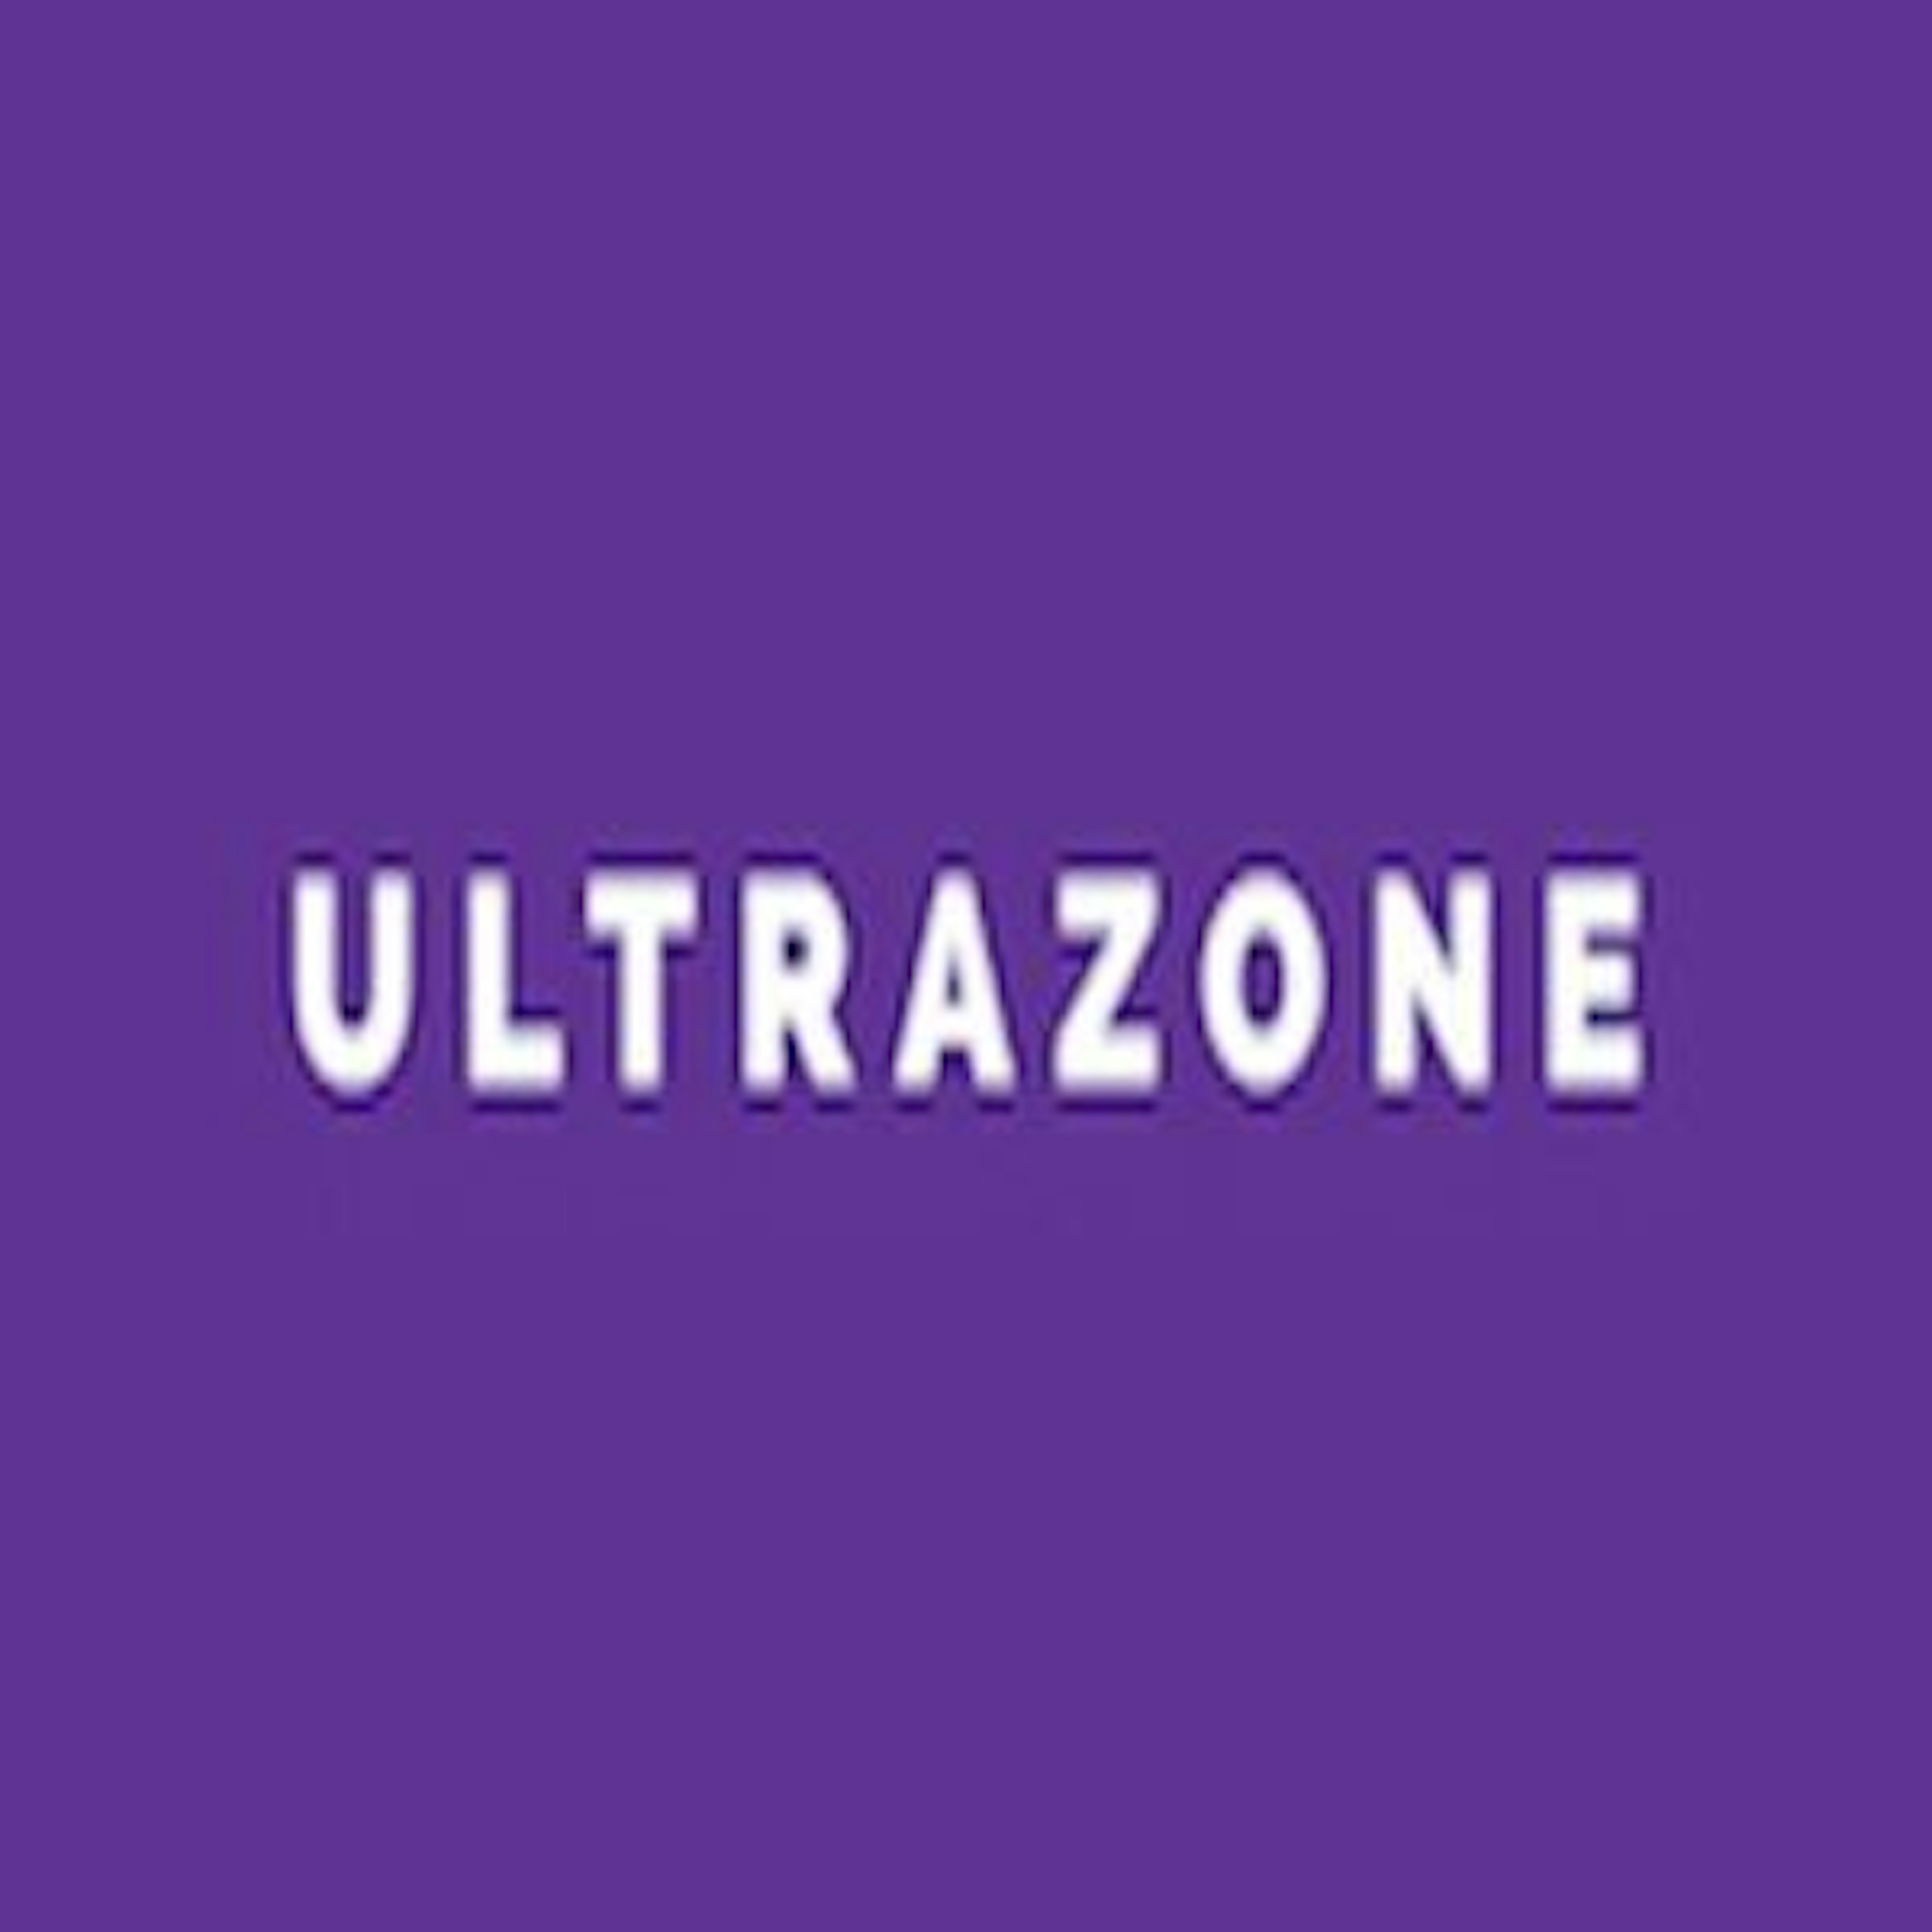 ULTRAZONE Xtreme Laser Tag